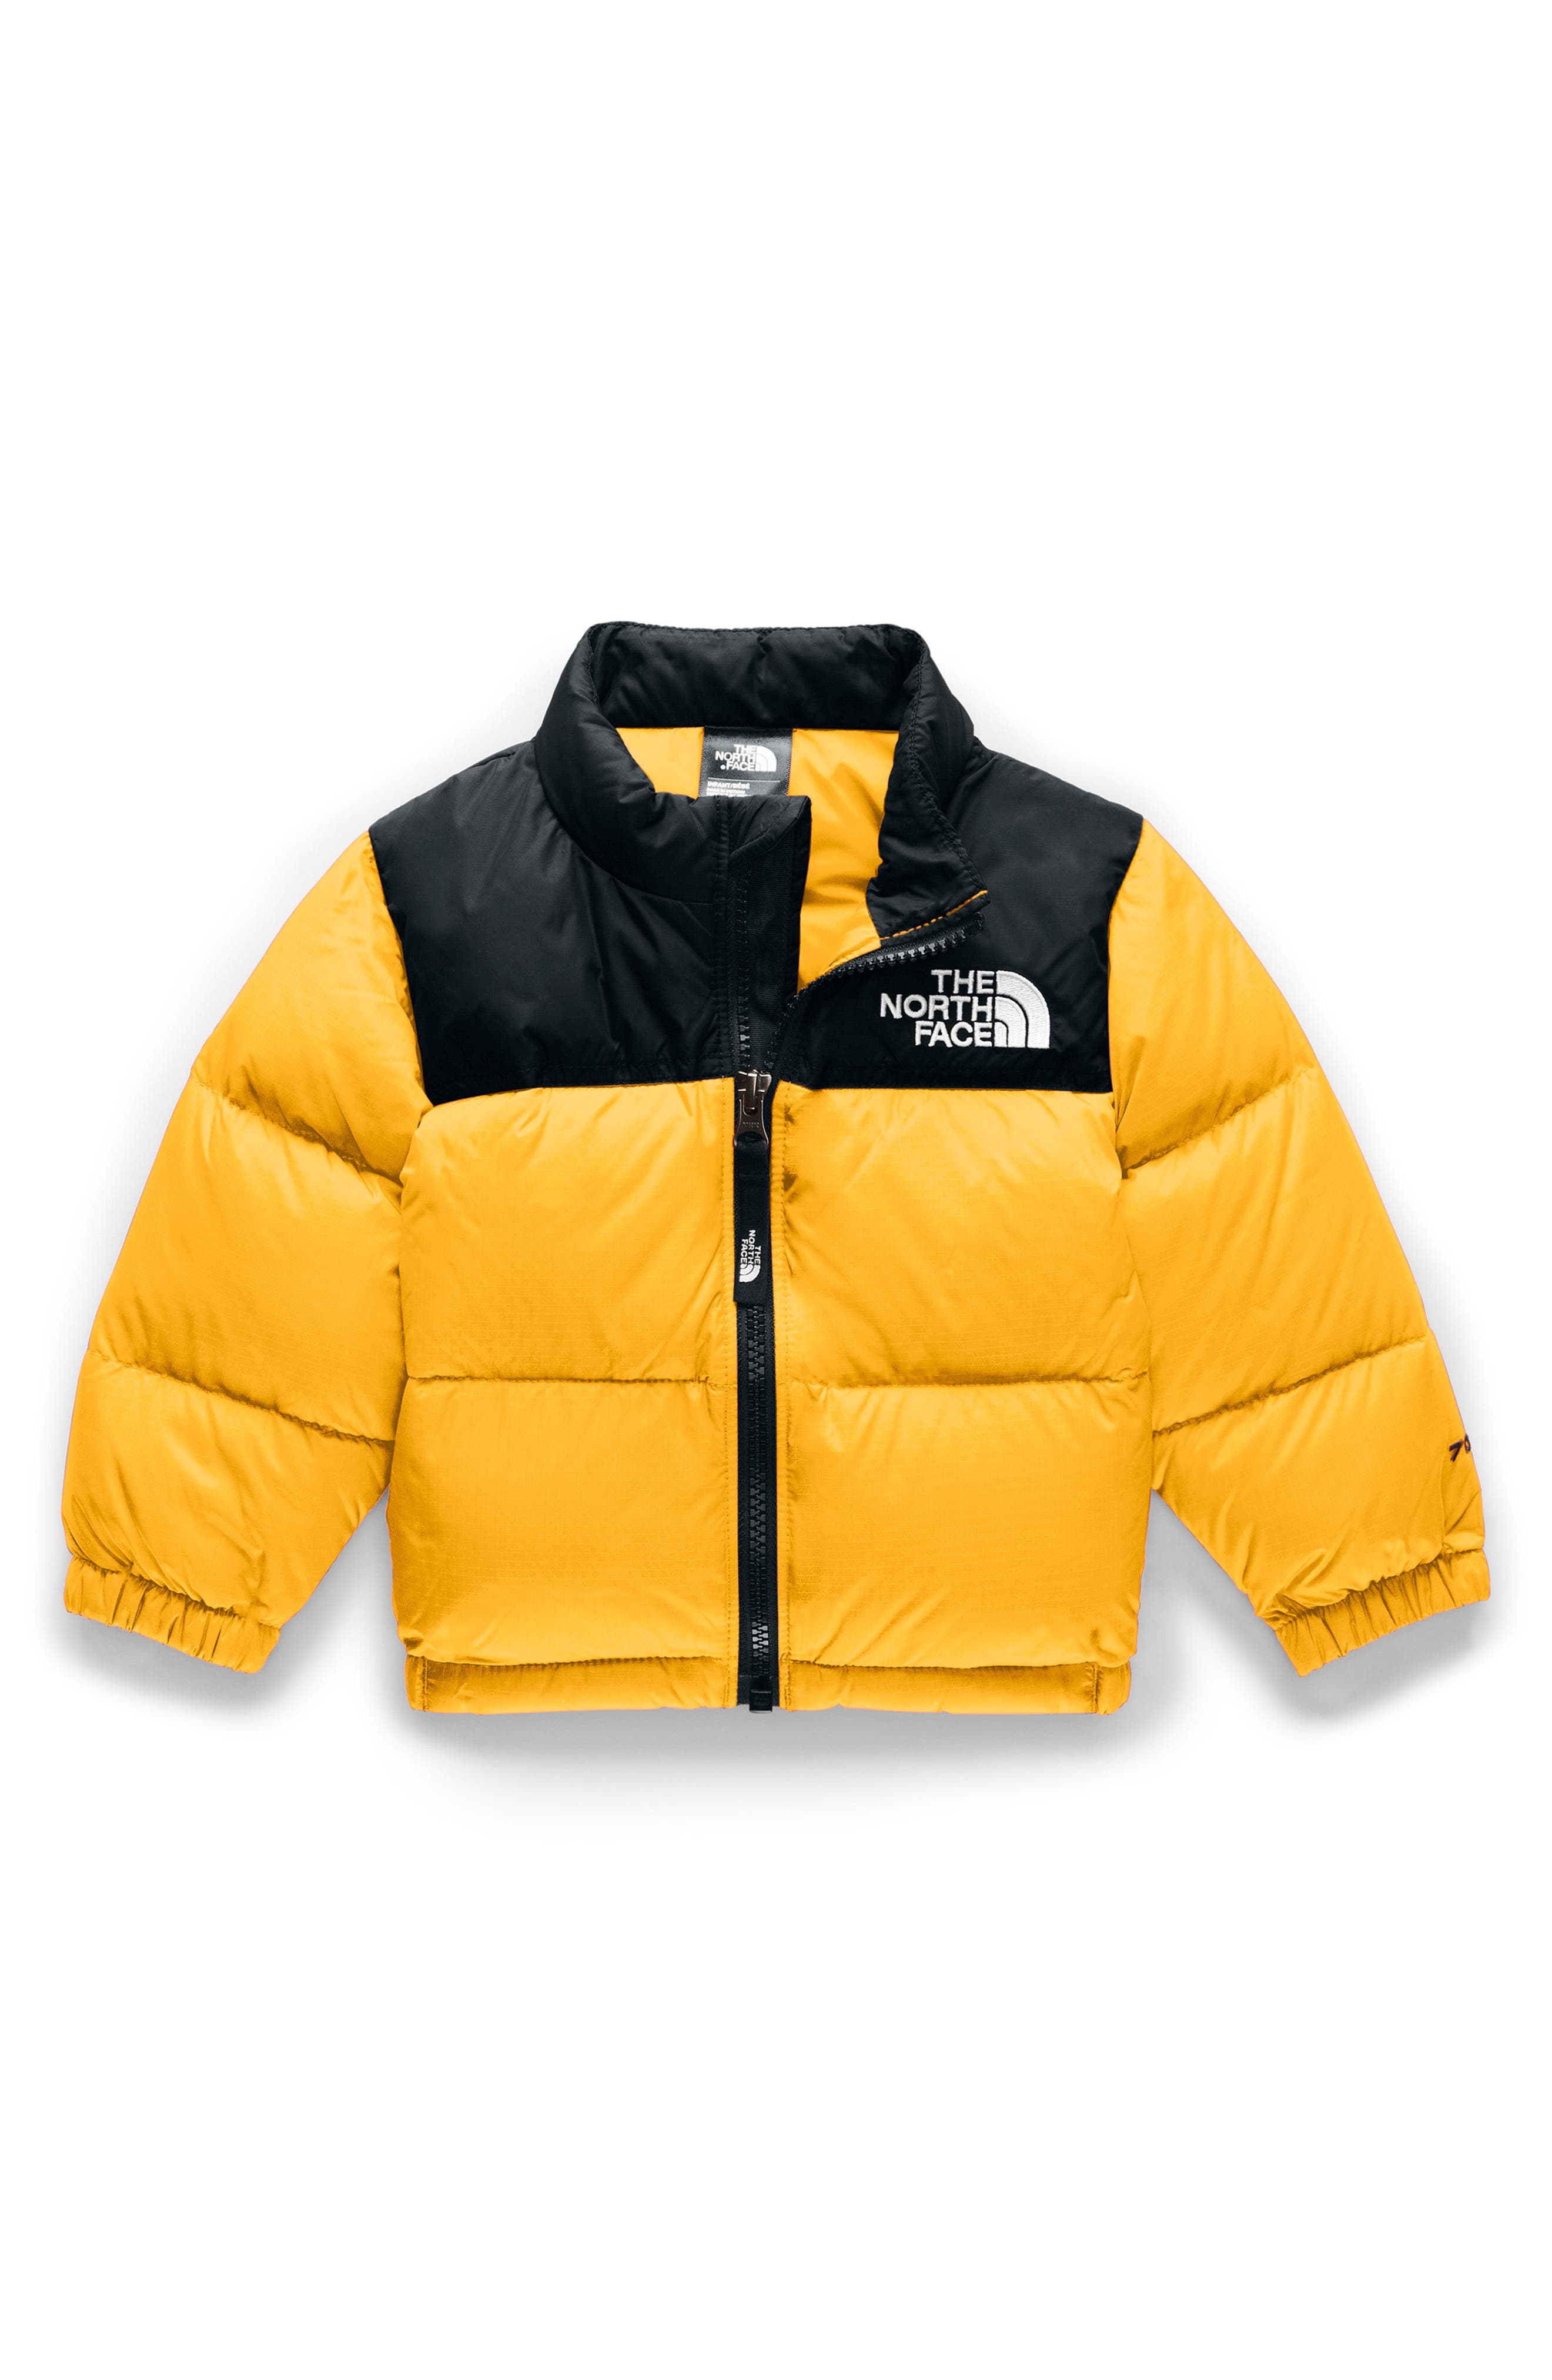 north face 700 down jacket